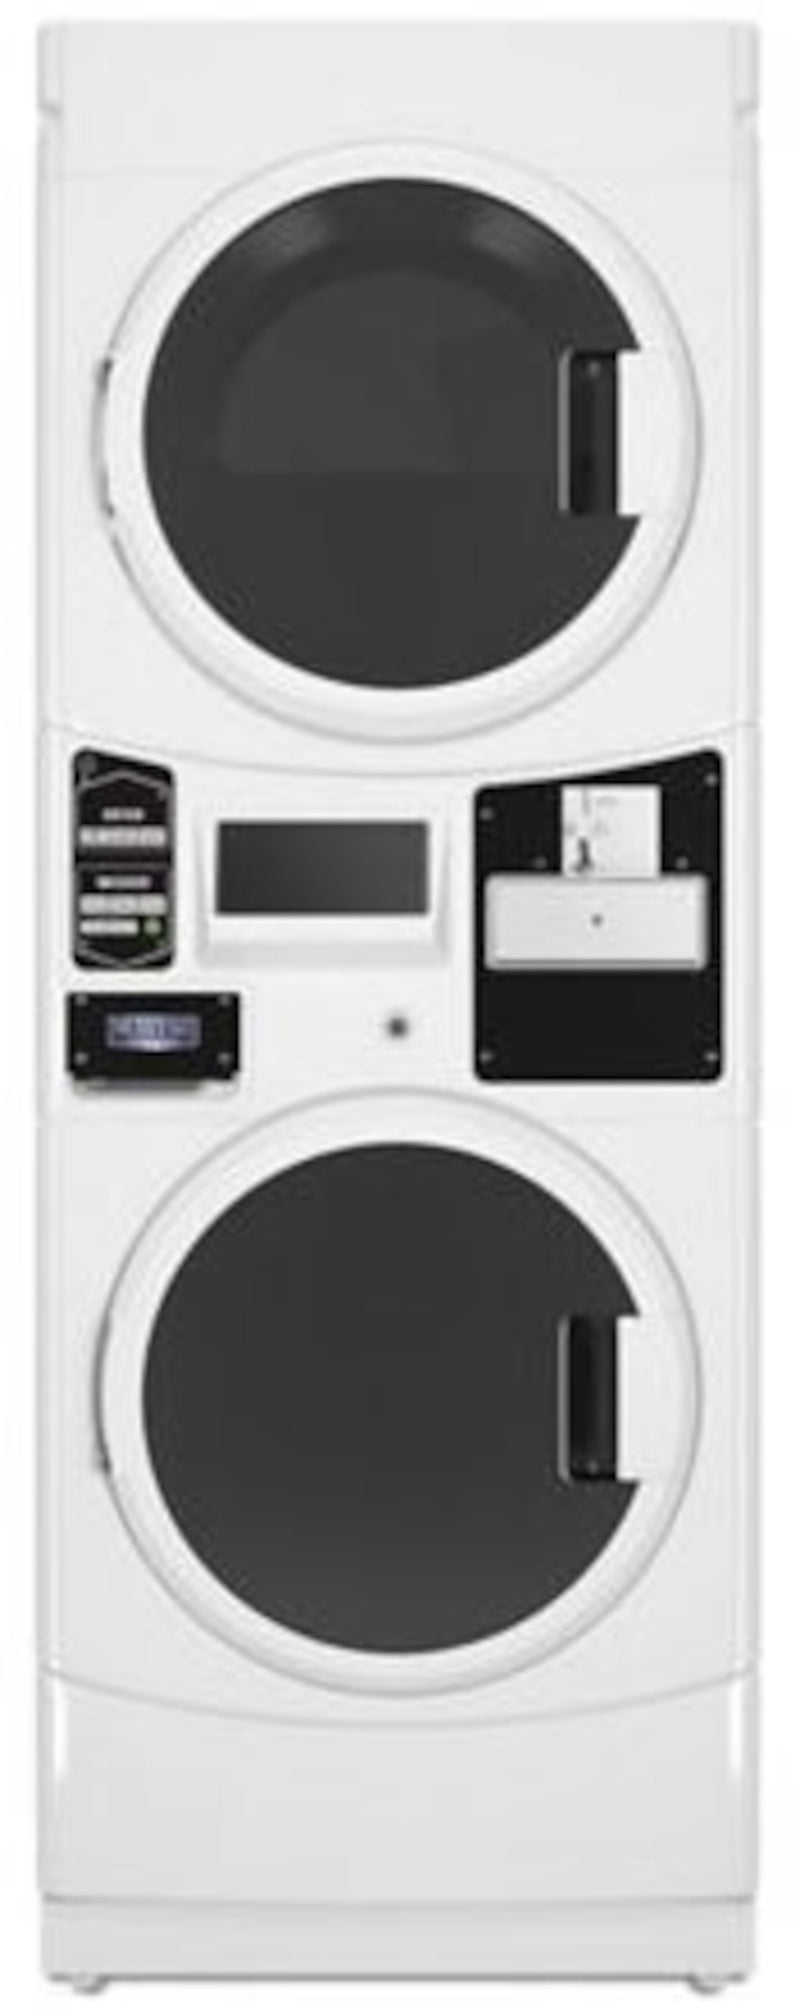 Maytag - 3.1 cu. Ft Washer and 6.7 cu. Ft Dryer WashTower in White - MLE22PDAZW